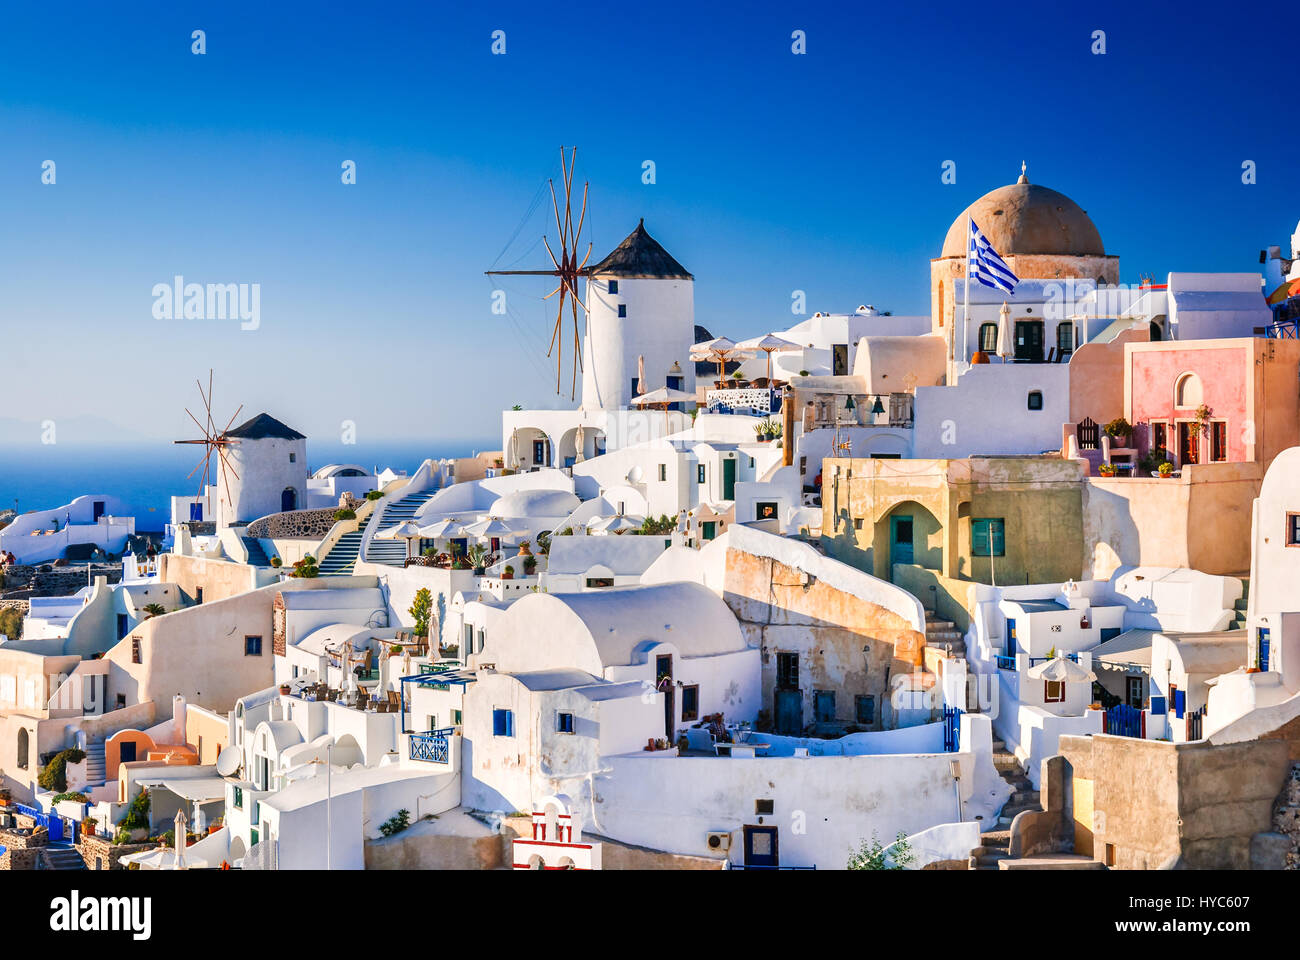 Santorini, Greece. Oia city with white and blue houses in Aegean Sea. Thira, Cyclades Islands. Stock Photo